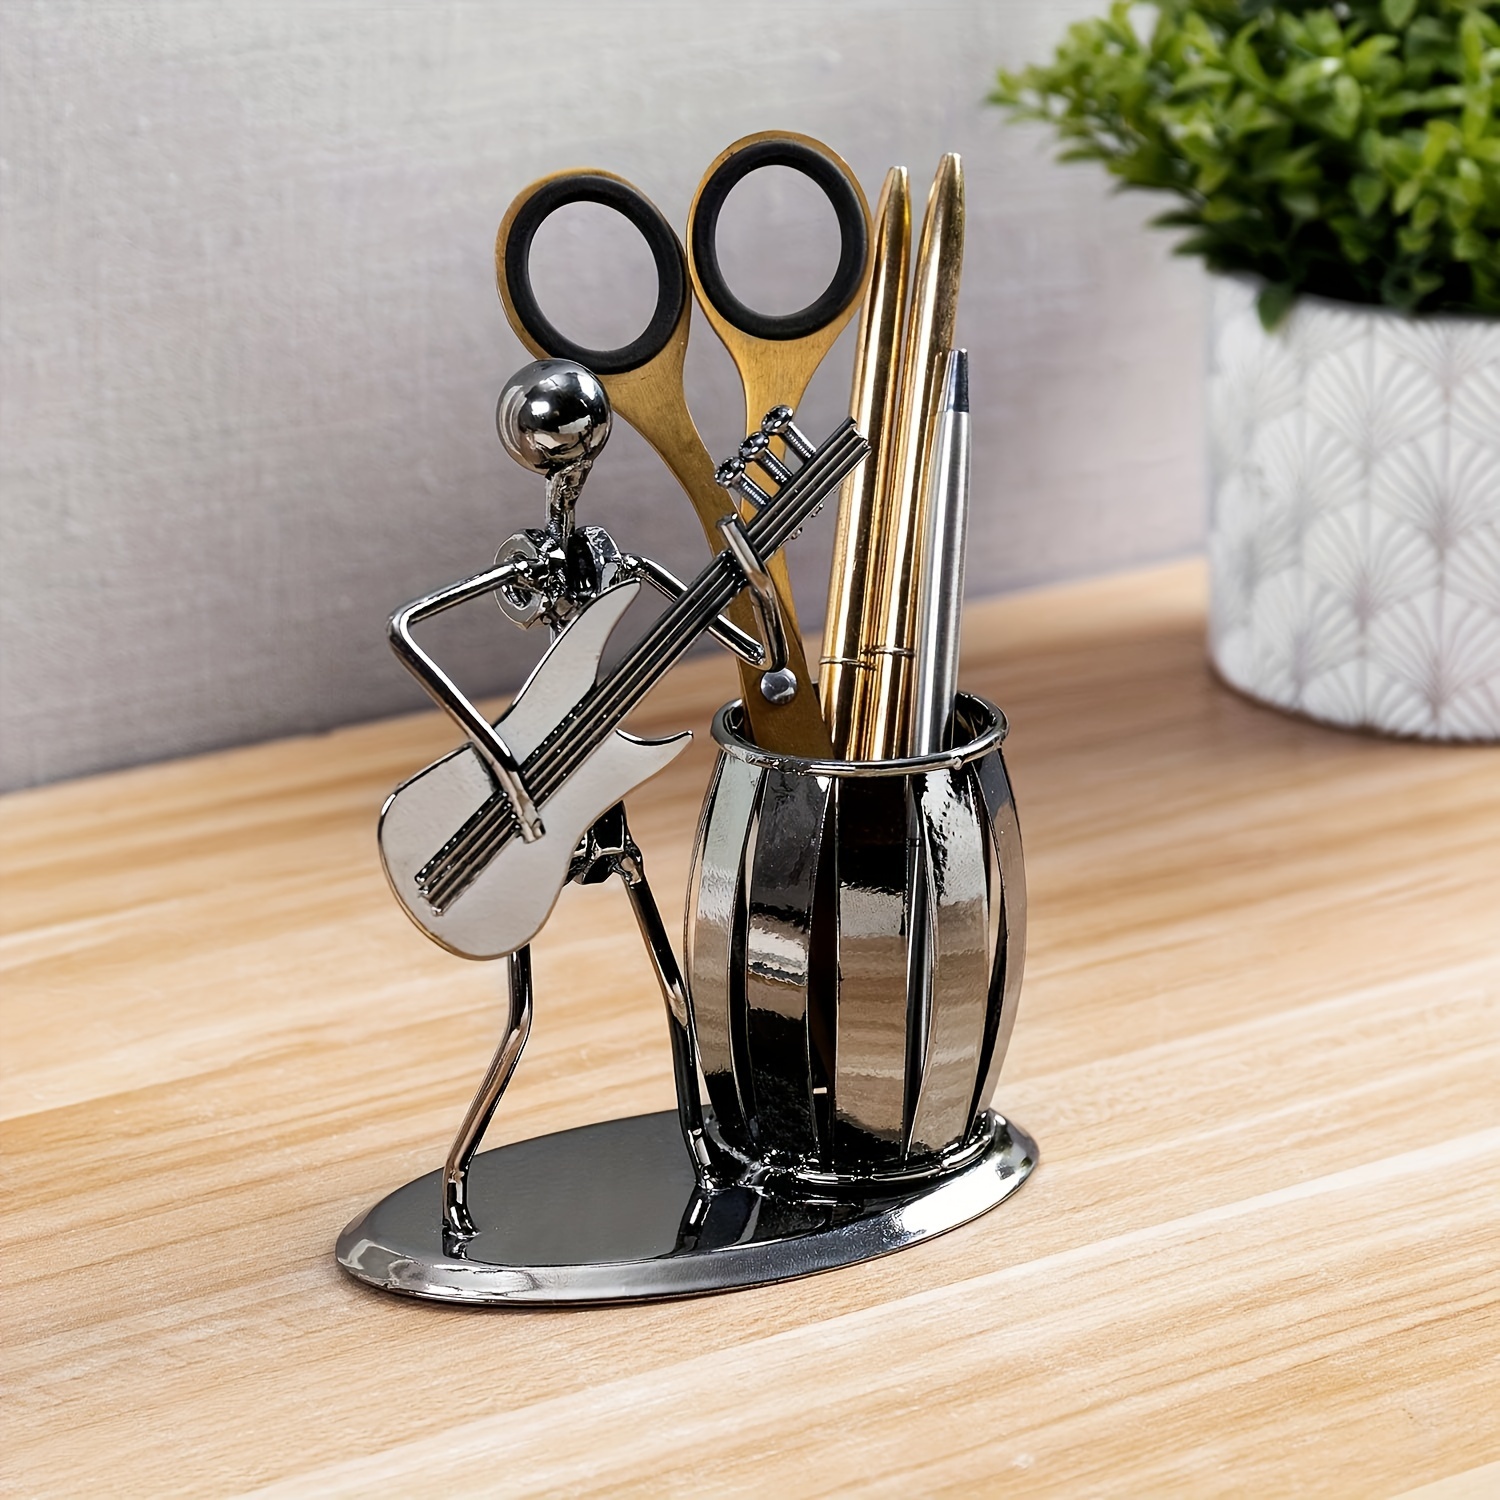 

1pc Metal Desktop Pen Holder, Rocker And Guitar Design, Office Supplies Organizer Pencil Cup, Perfect Gift For Music Lovers